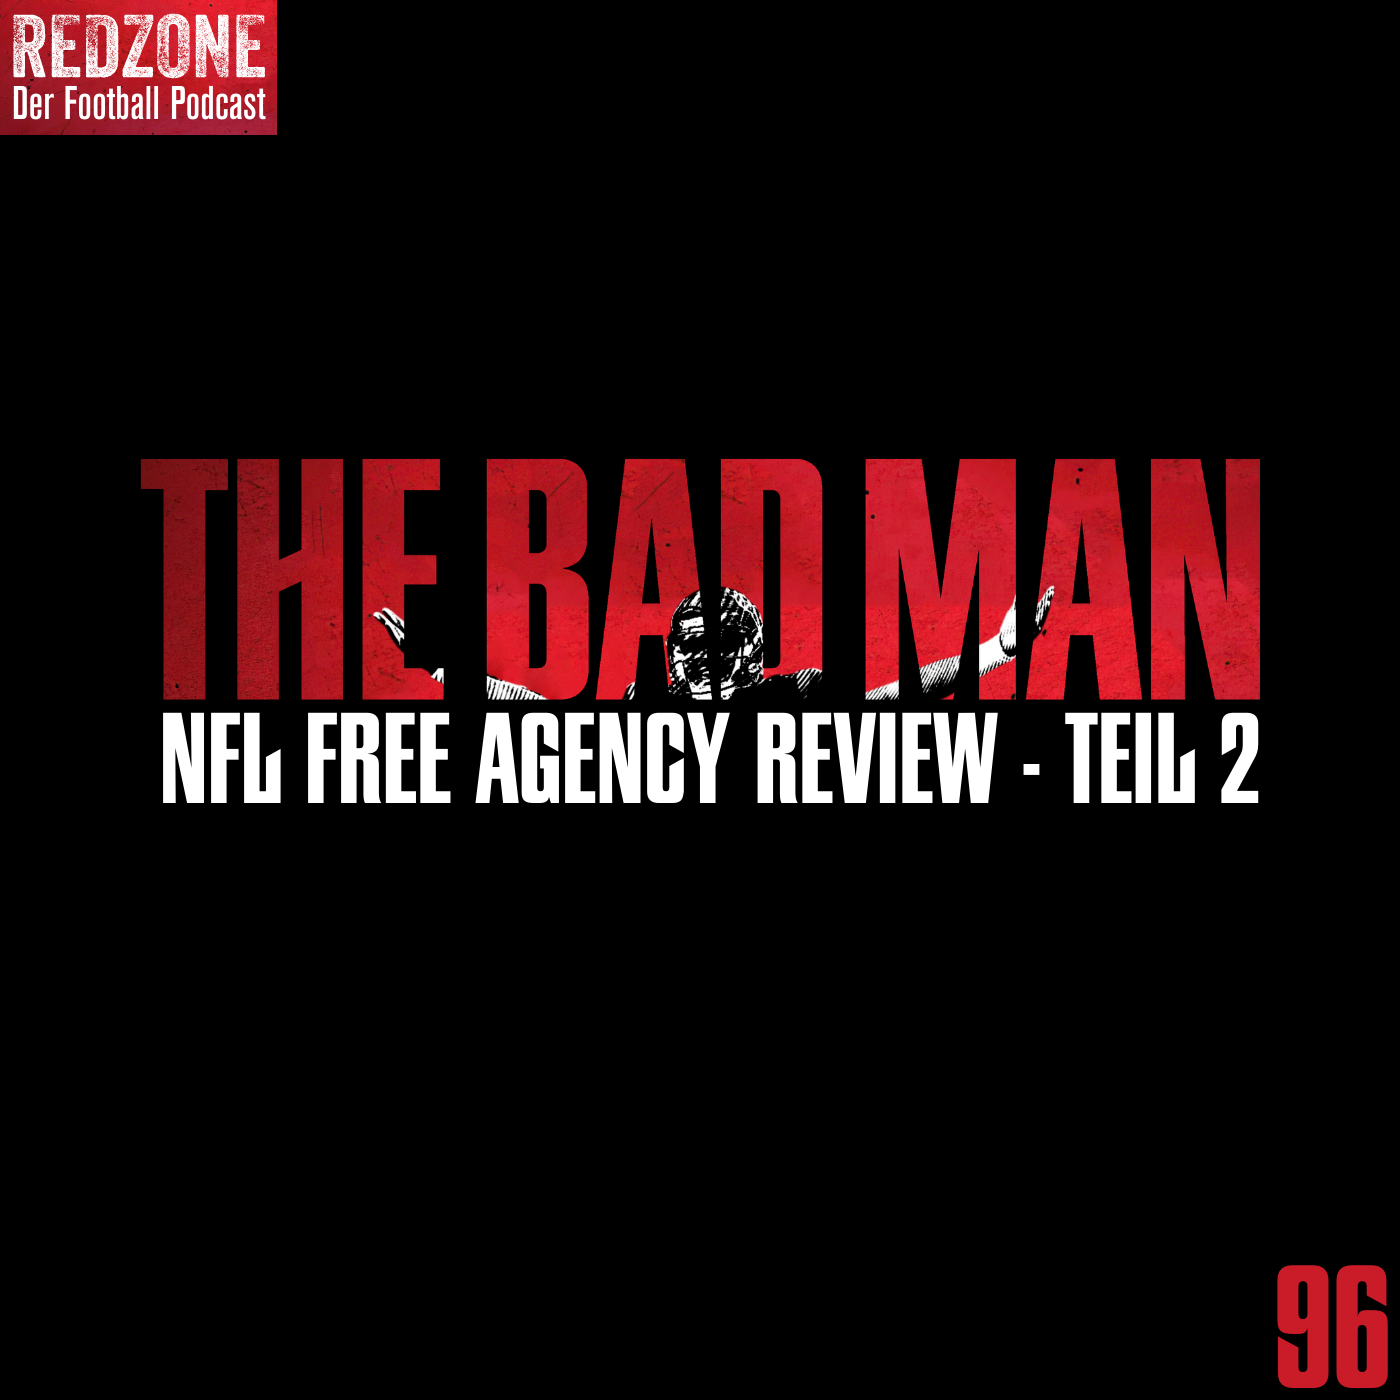 NFL Free Agency Review Teil 2: The Bad Man (EP 96)